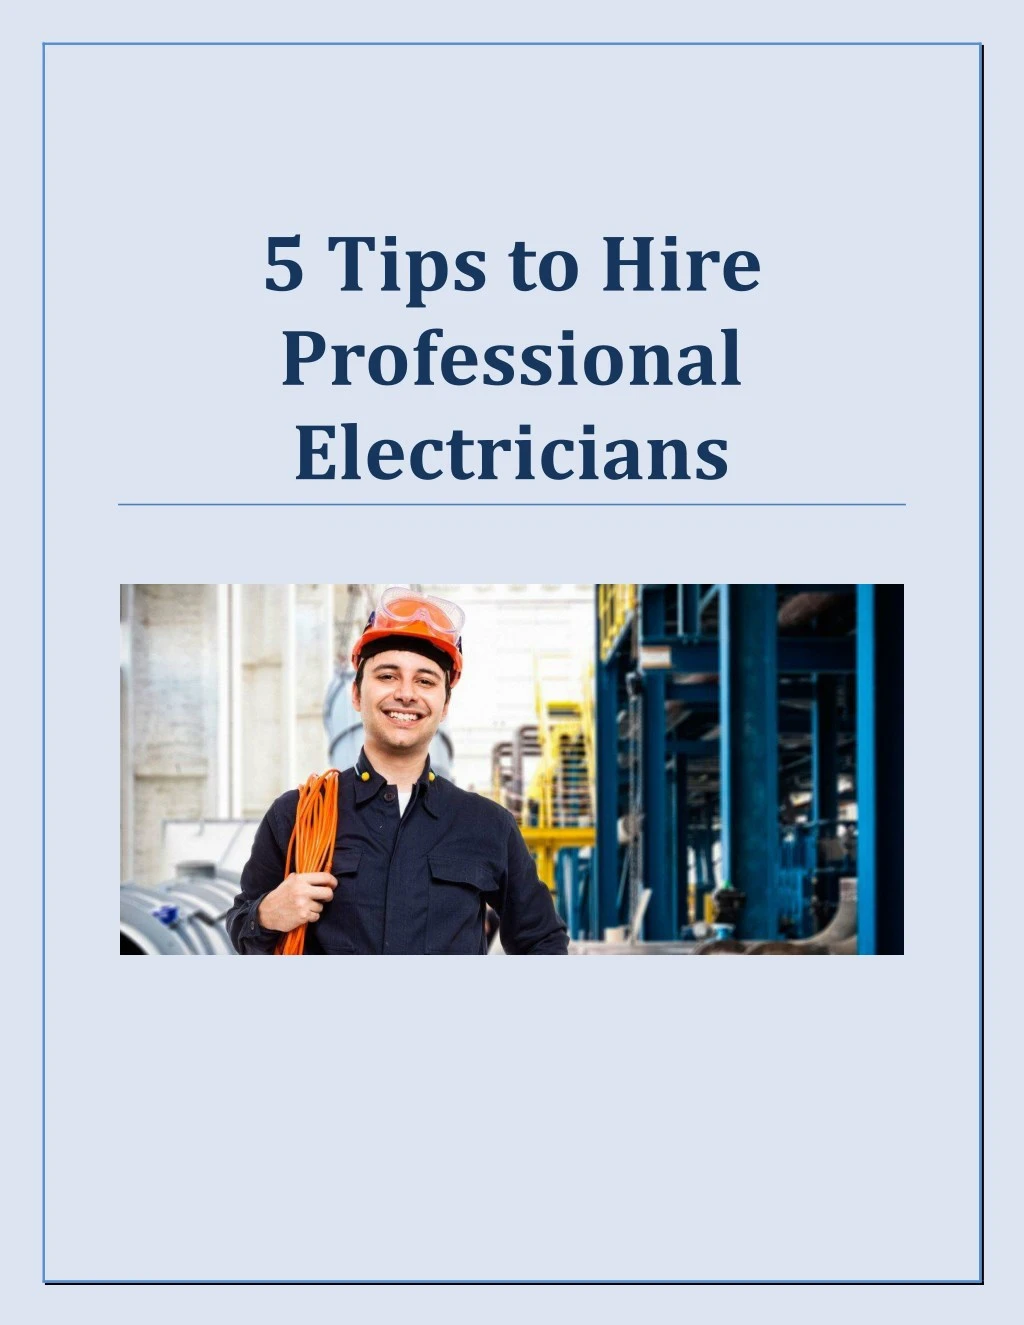 5 tips to hire professional electricians